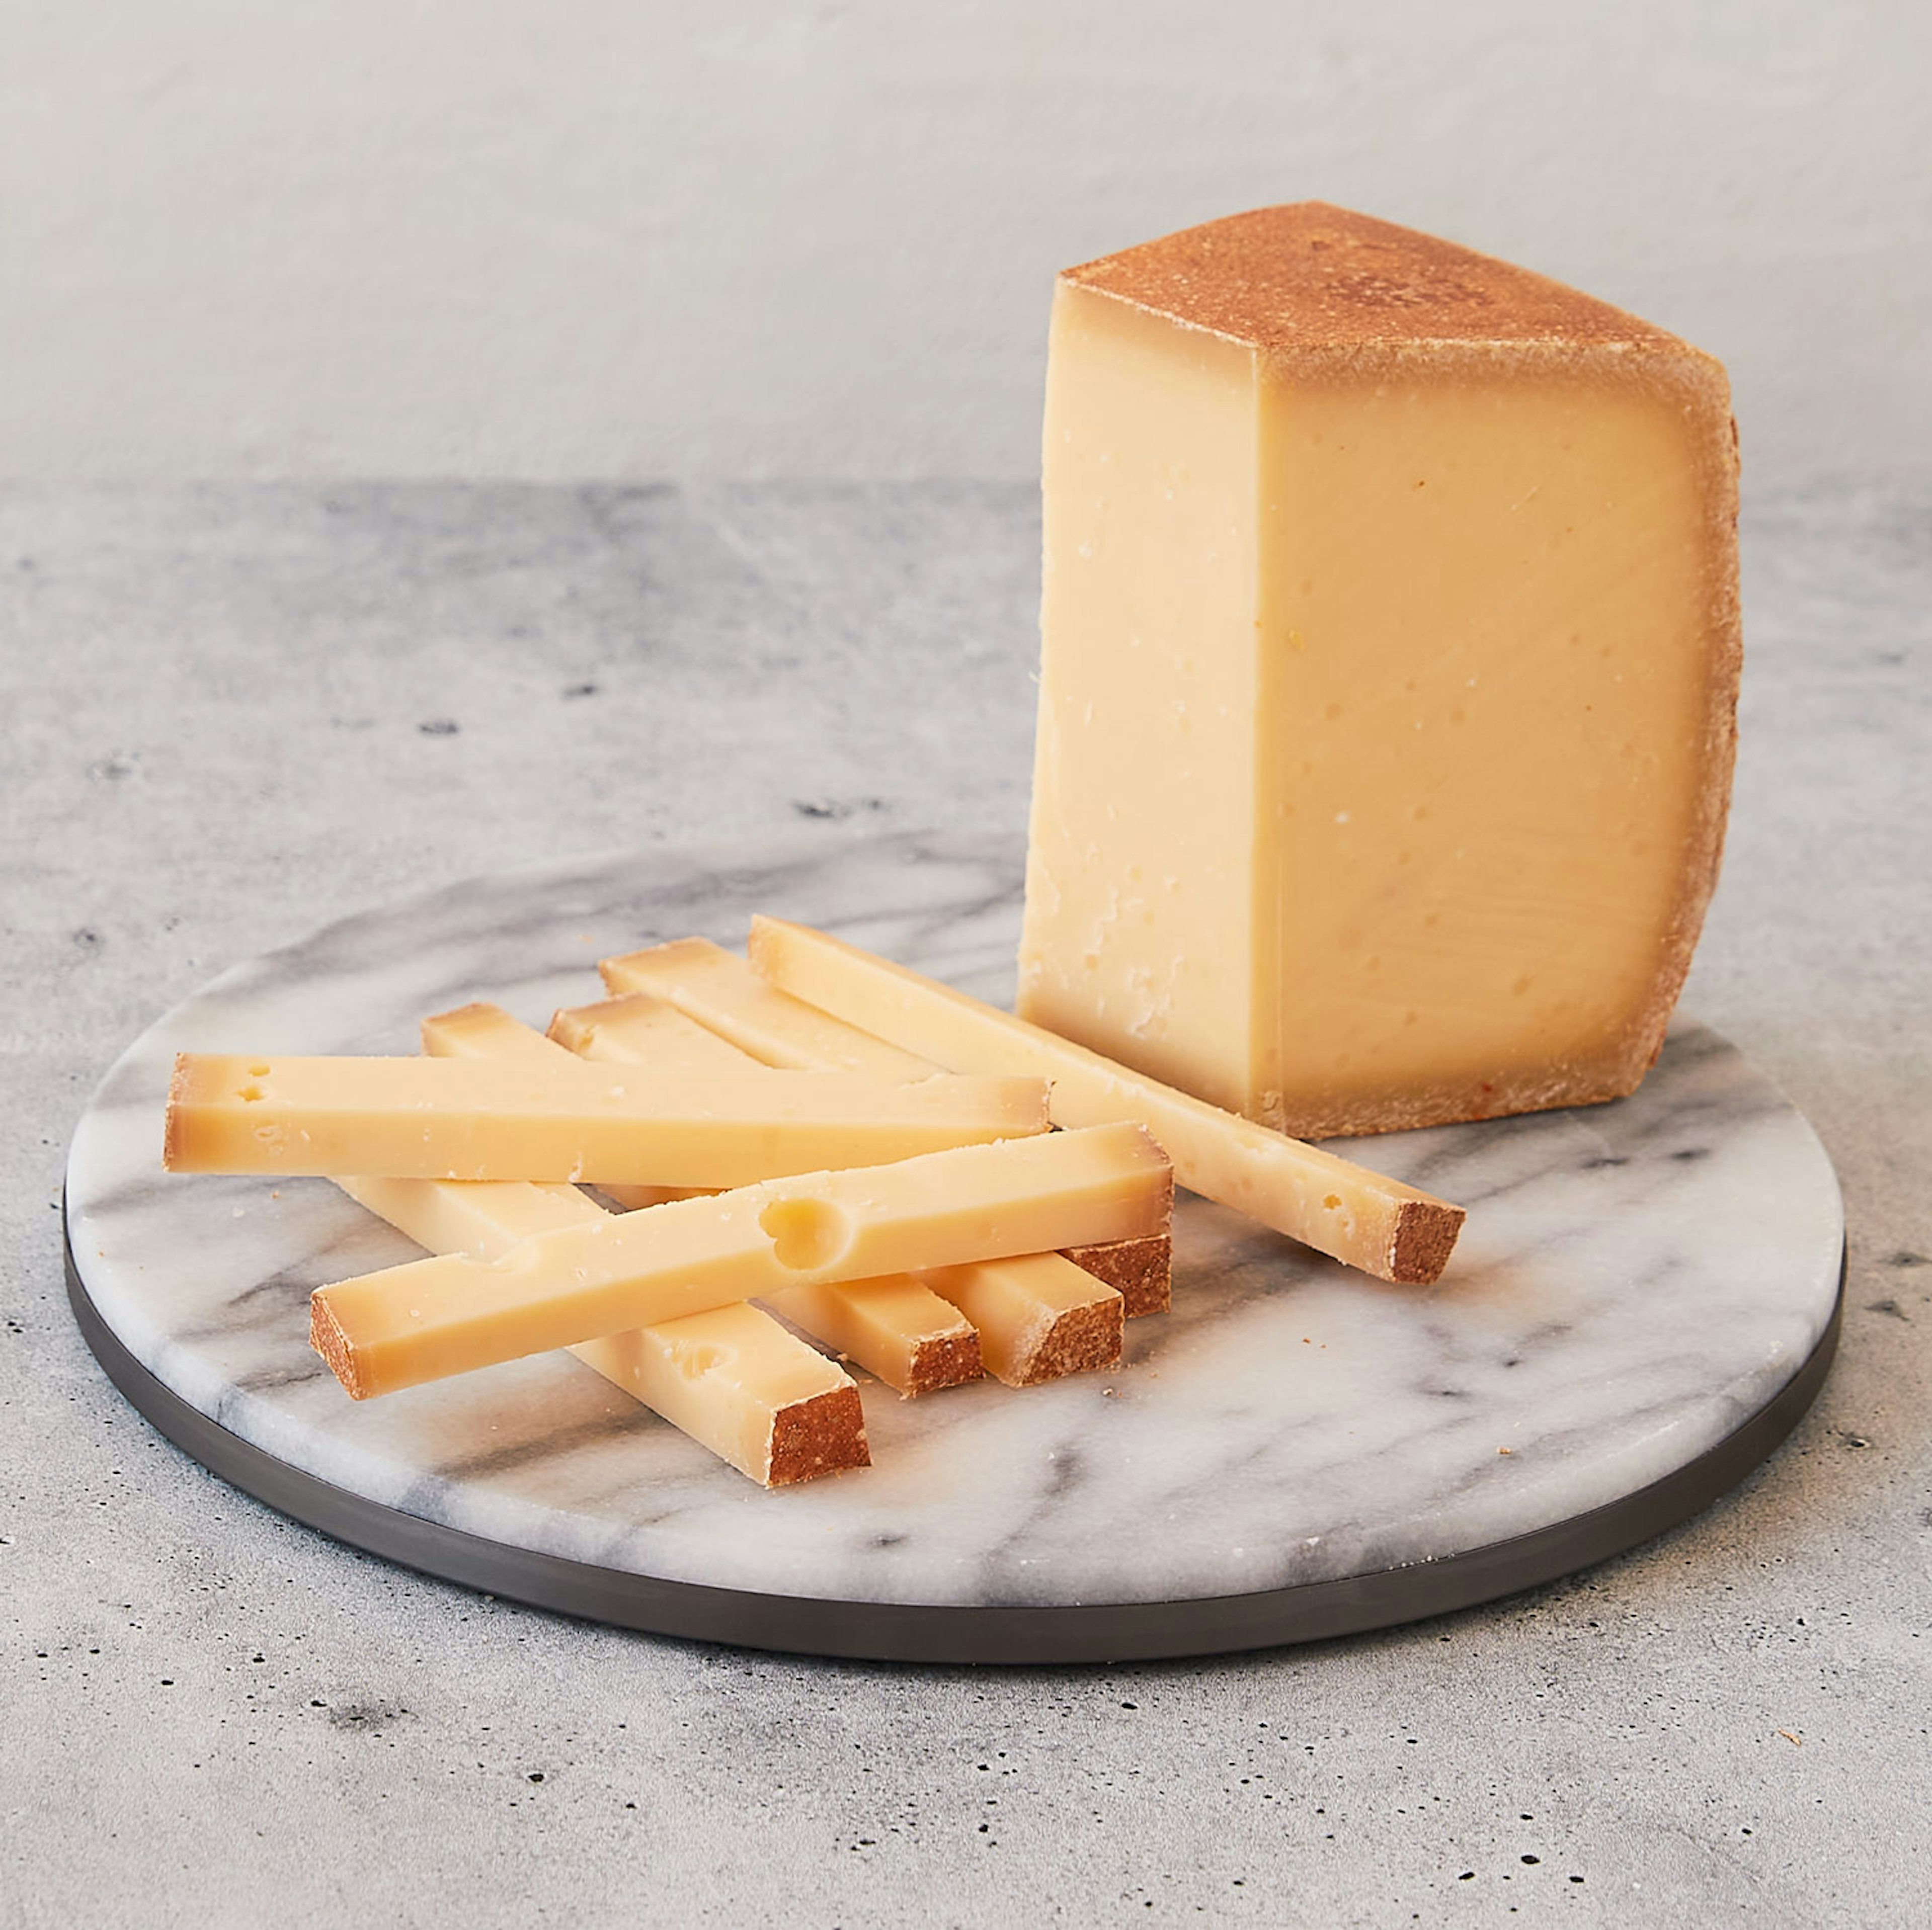 Murrays-Cave-Aged-Reserve-Annelies-cheese-9572-01